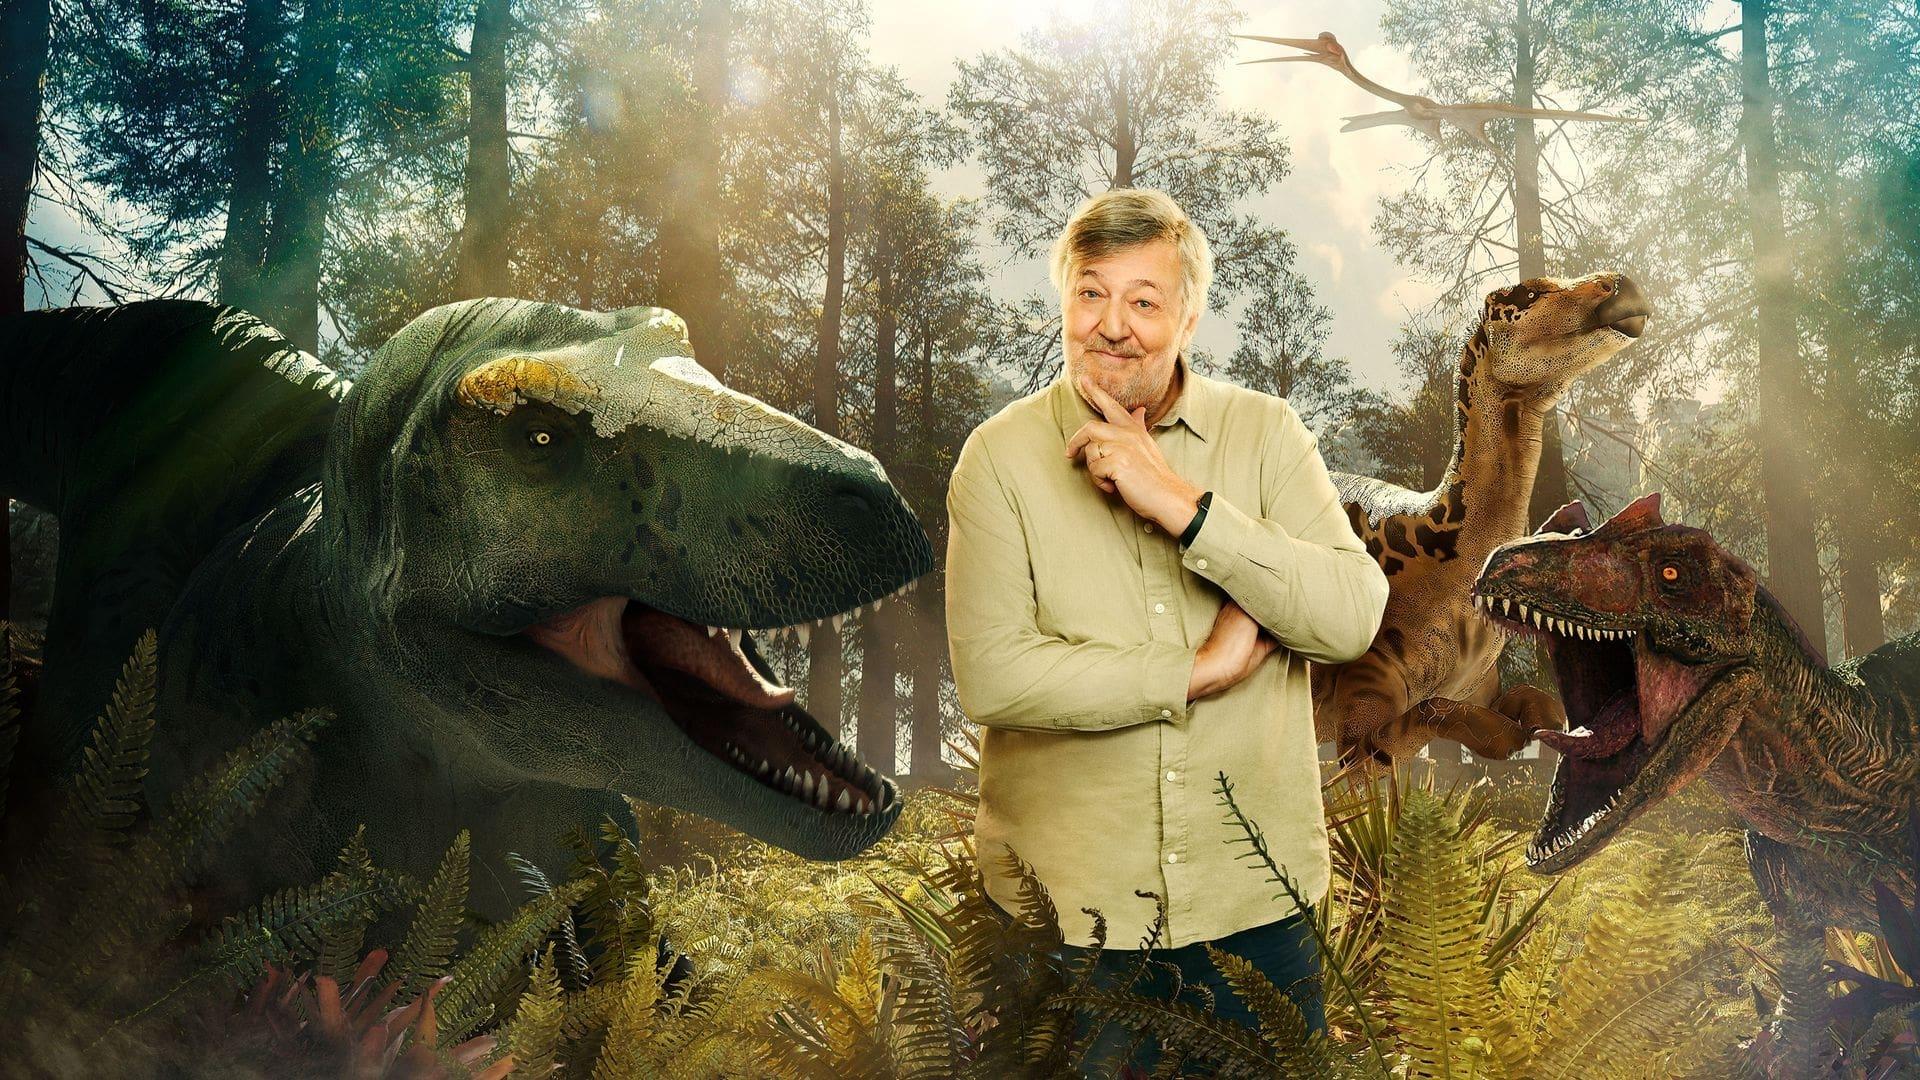 Dinosaur with Stephen Fry backdrop